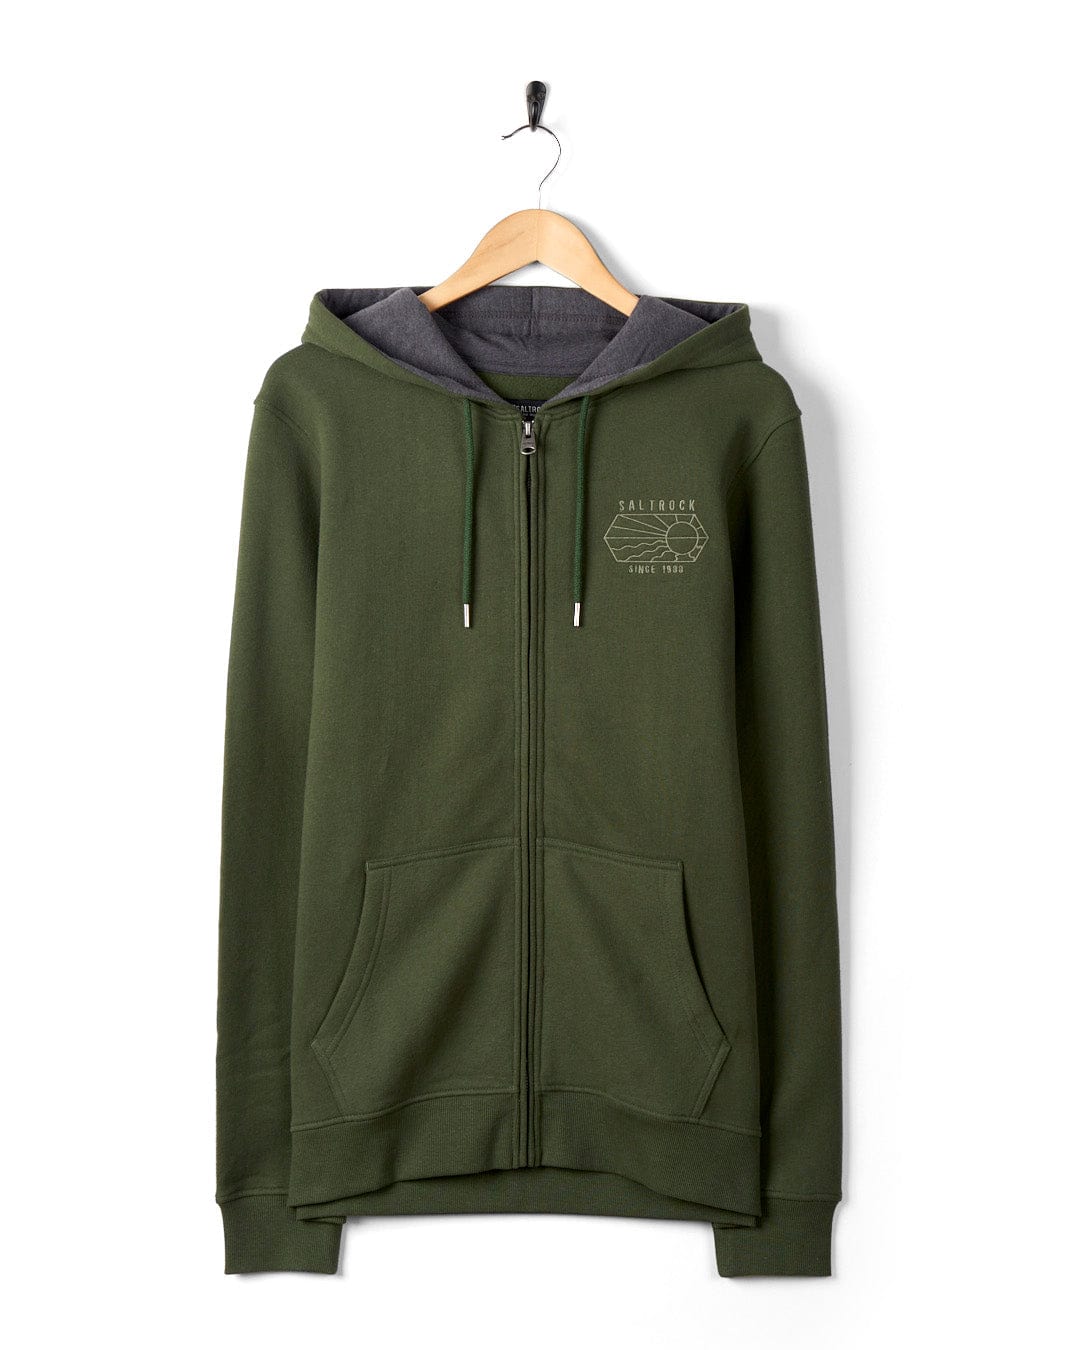 Saltrock Vantage Outline - Recycled Mens Zip Hoodie in Dark Green with gray hood lining, hanging on a wall, featuring embroidered Saltrock branding on the left chest area.